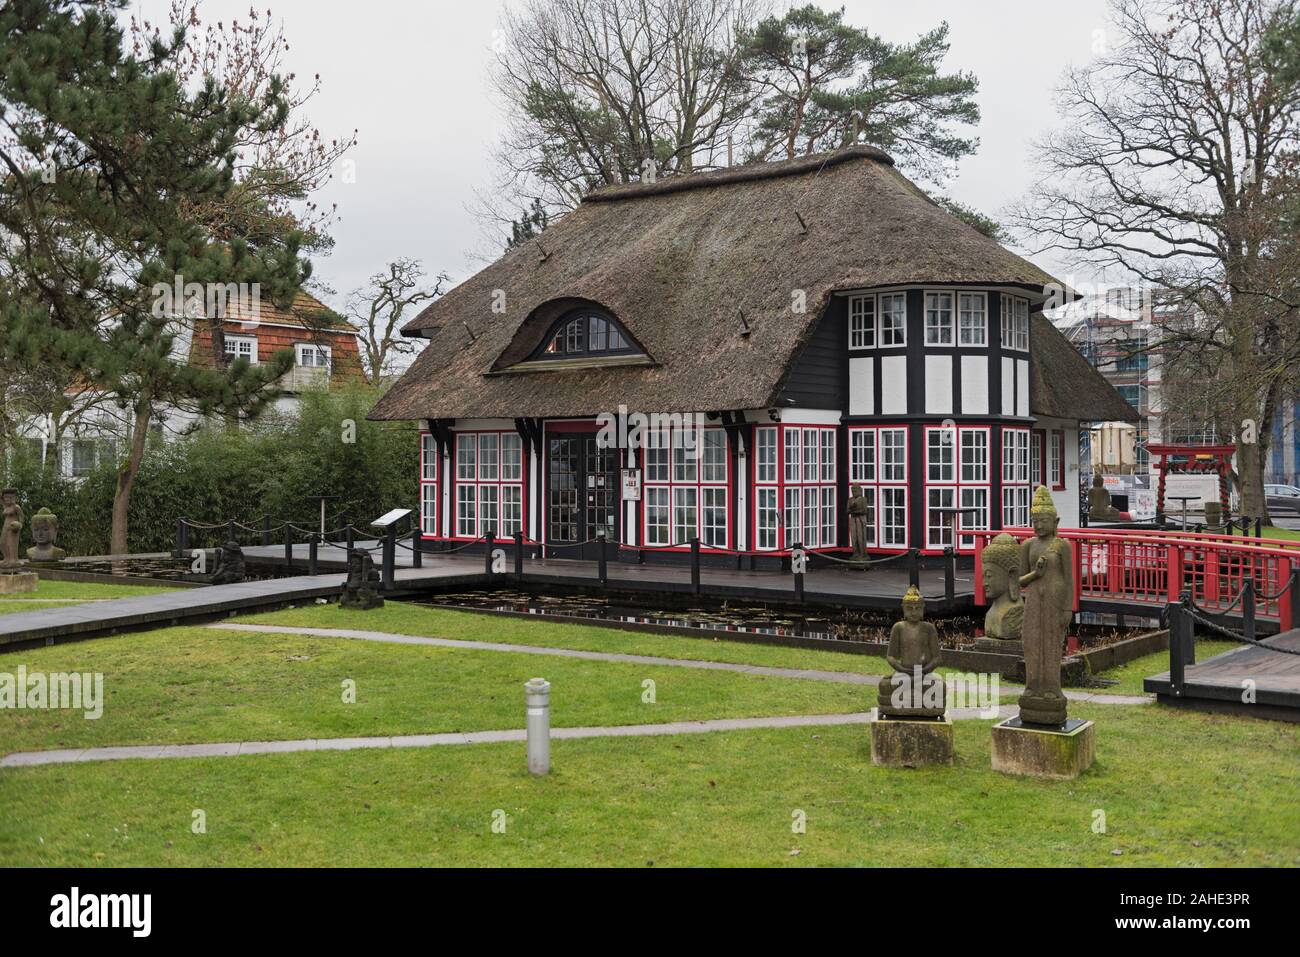 thatched mikado garden on the waterfront of timmendorfer strand luebeck Stock Photo